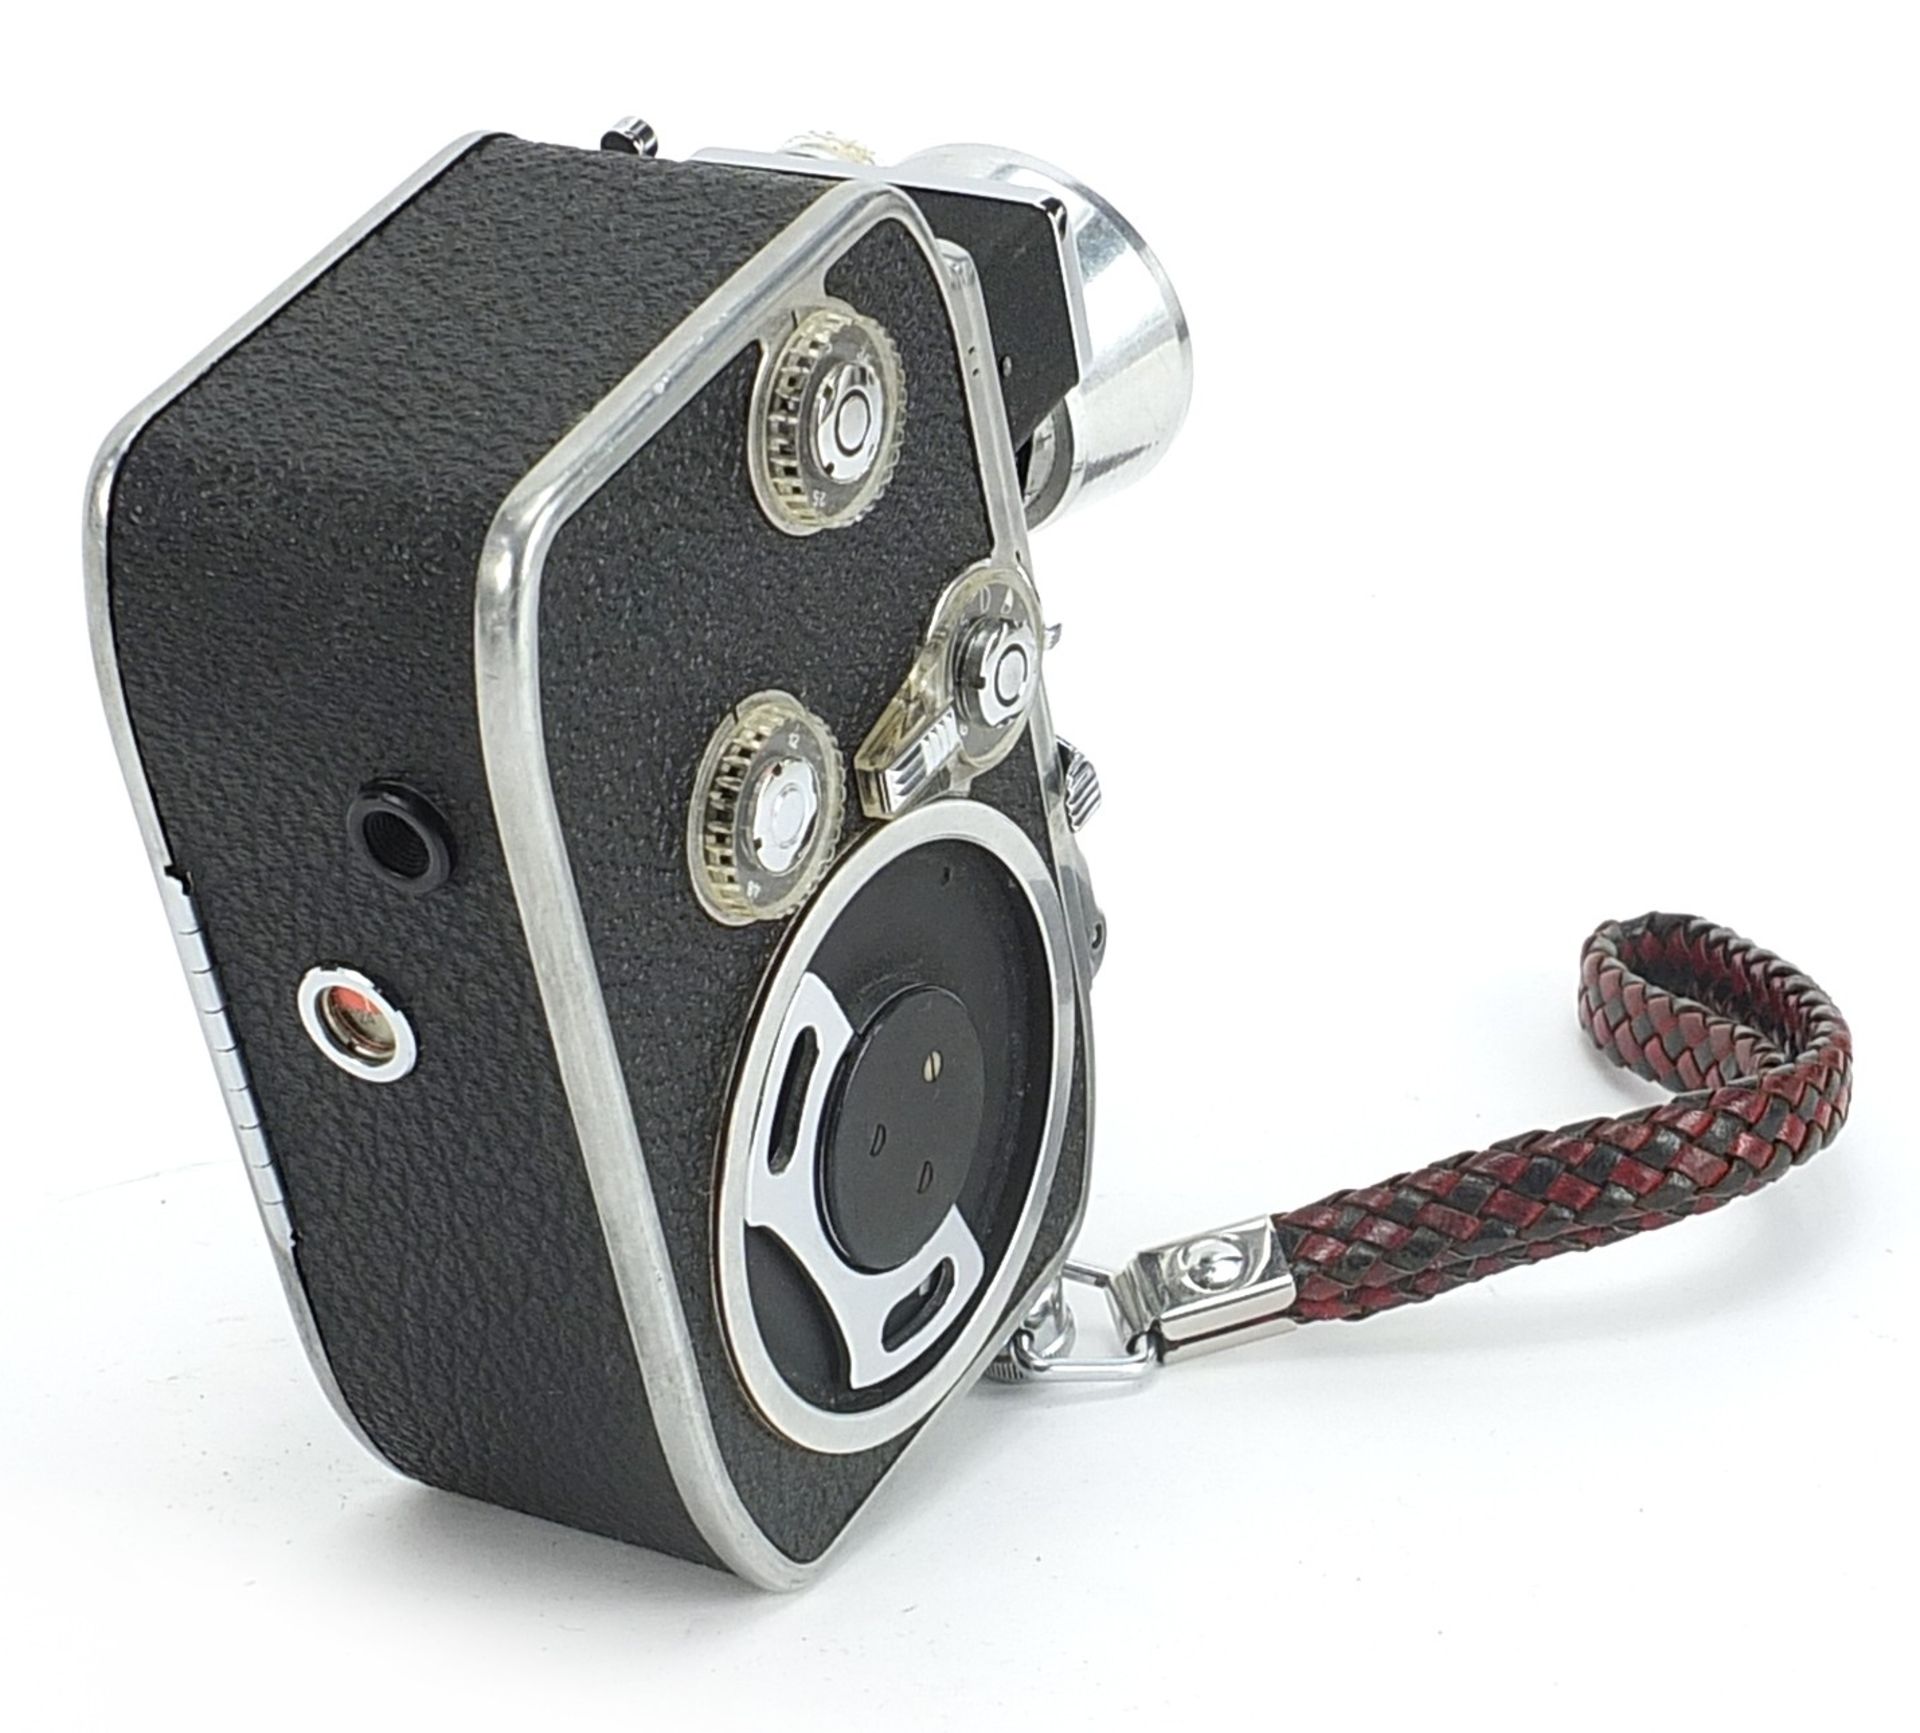 Bolex Paillard B8L camera with handle, case and instuctions, the case 20cm wide - Image 5 of 6